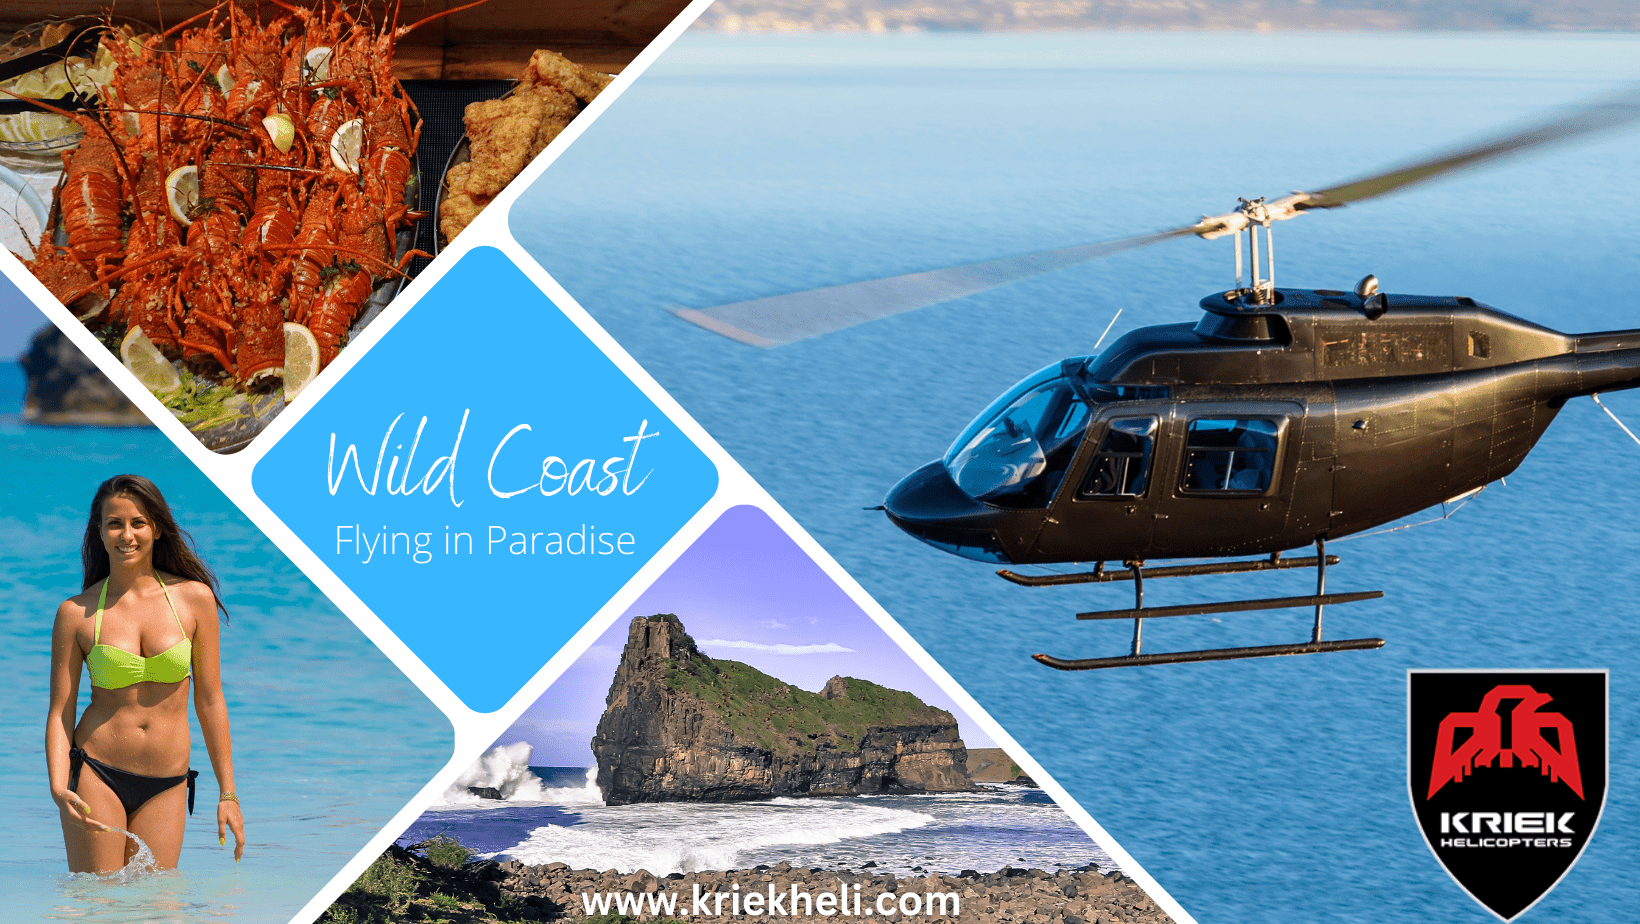 Wild Coast helicopter holidays South Africa - JAGSA Trophy hunting safari excursions